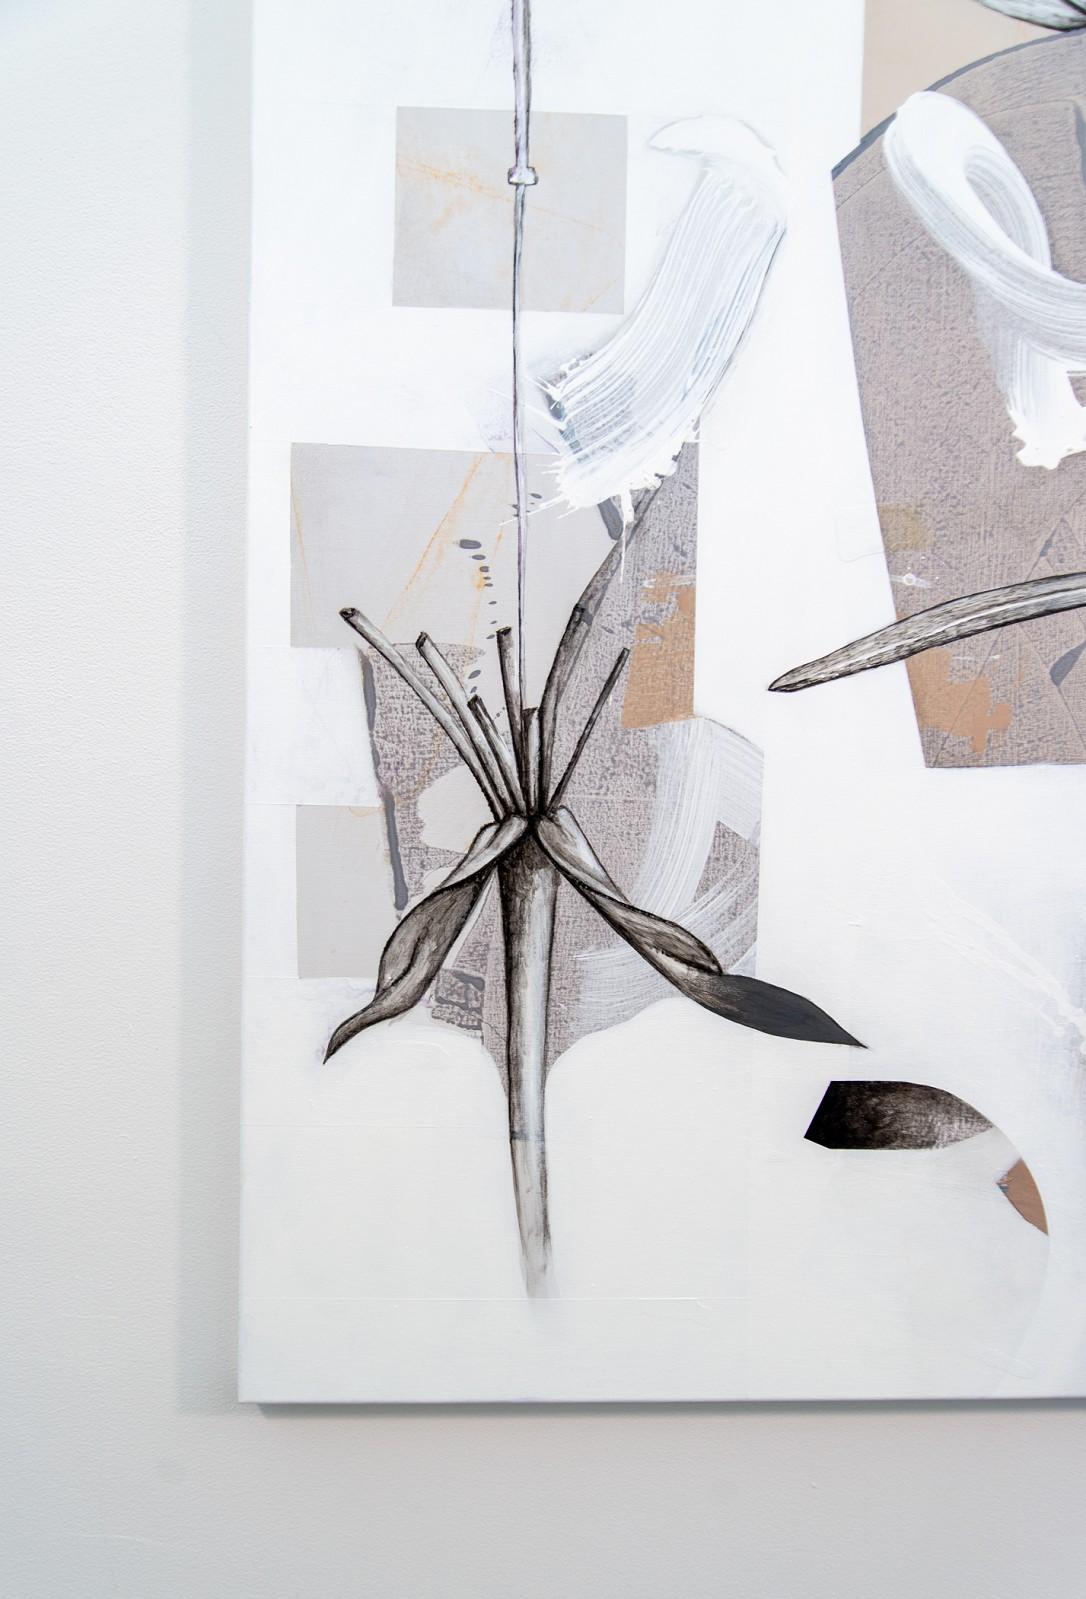 Fiona Ackerman’s Silver is a stunning abstract composition of delicate flowers—roots, bulbs and organic shapes in shimmering white. This is one of a series of acrylic pieces she created in 2021 inspired by the 17th century botanical illustrations of